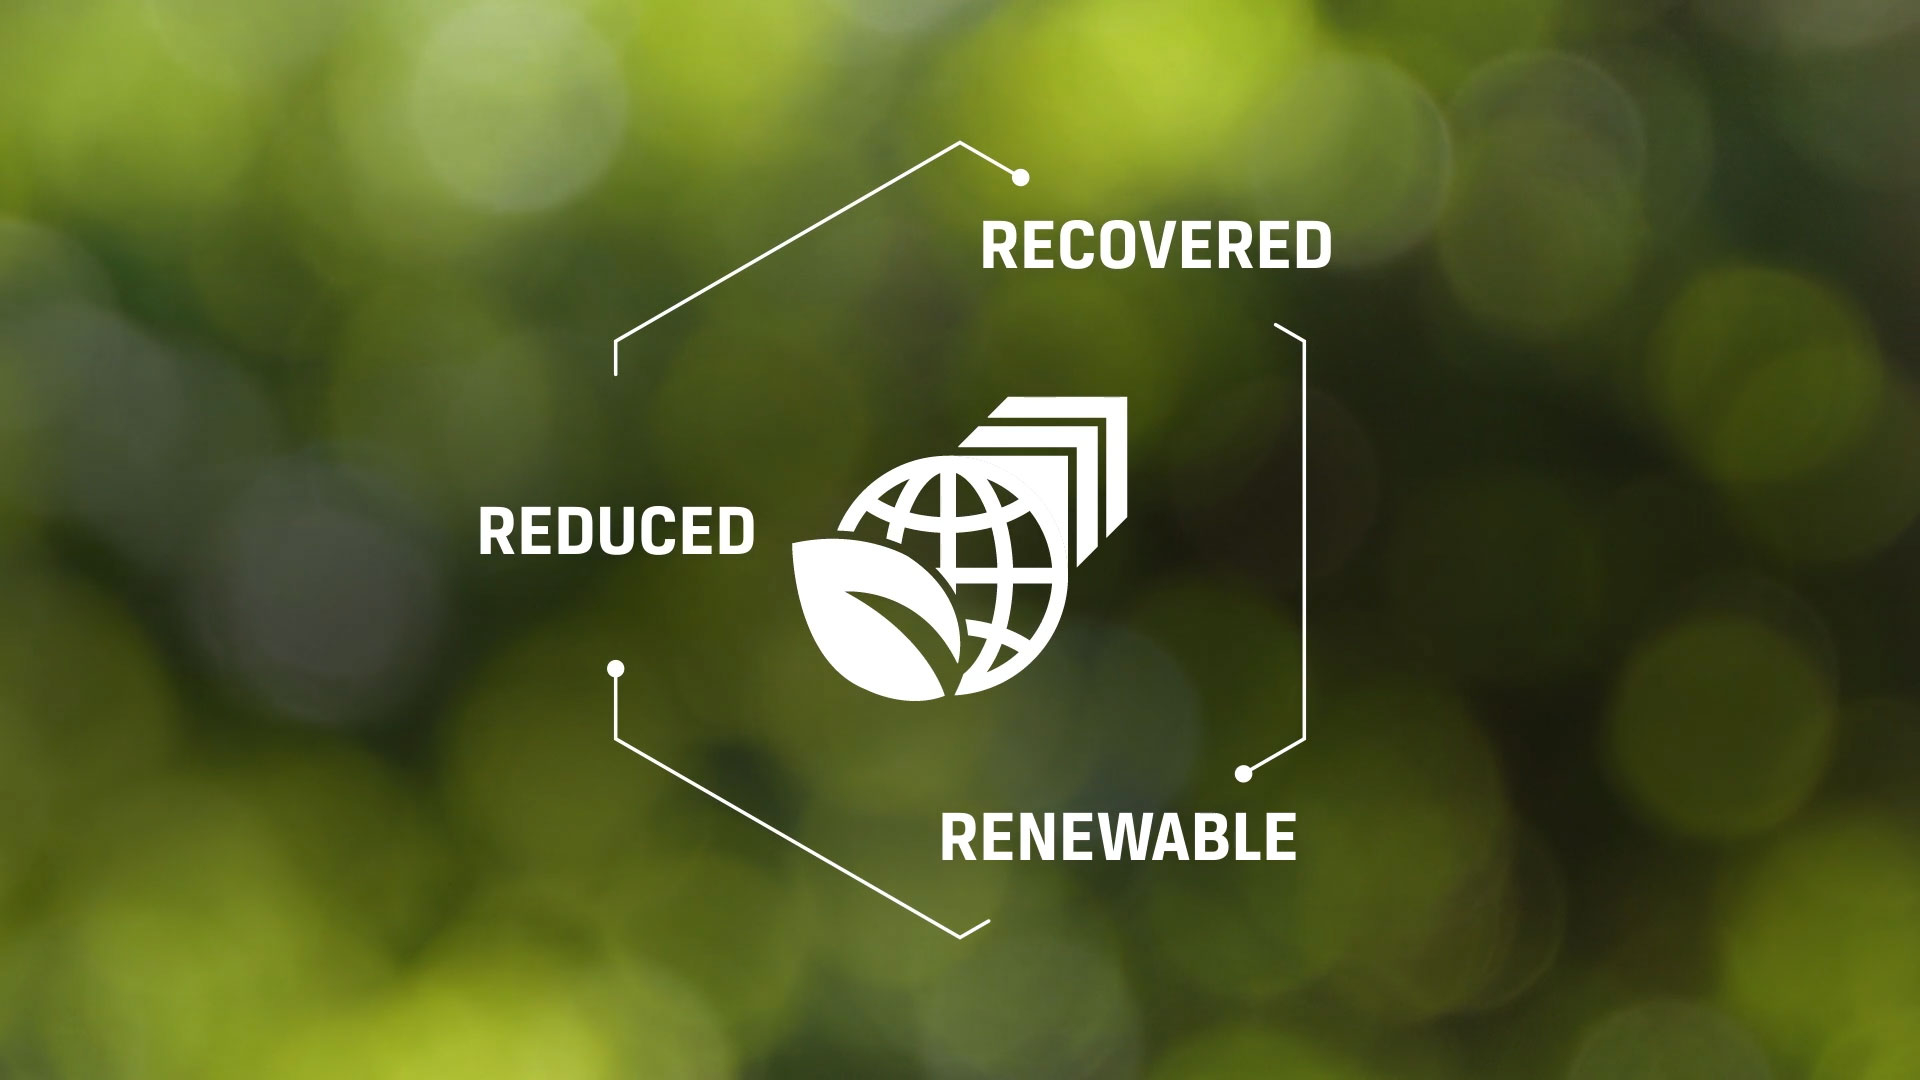 Introducing EVOLVE™ Sustainable Solutions: This technology platform focuses on advancing sustainable reinforcing carbons that deliver the performance, quality, and consistency that the industry requires at scale, leveraging circular value chains, and/or renewable and bio-based materials, and/or processes that reduce greenhouse gas emissions.